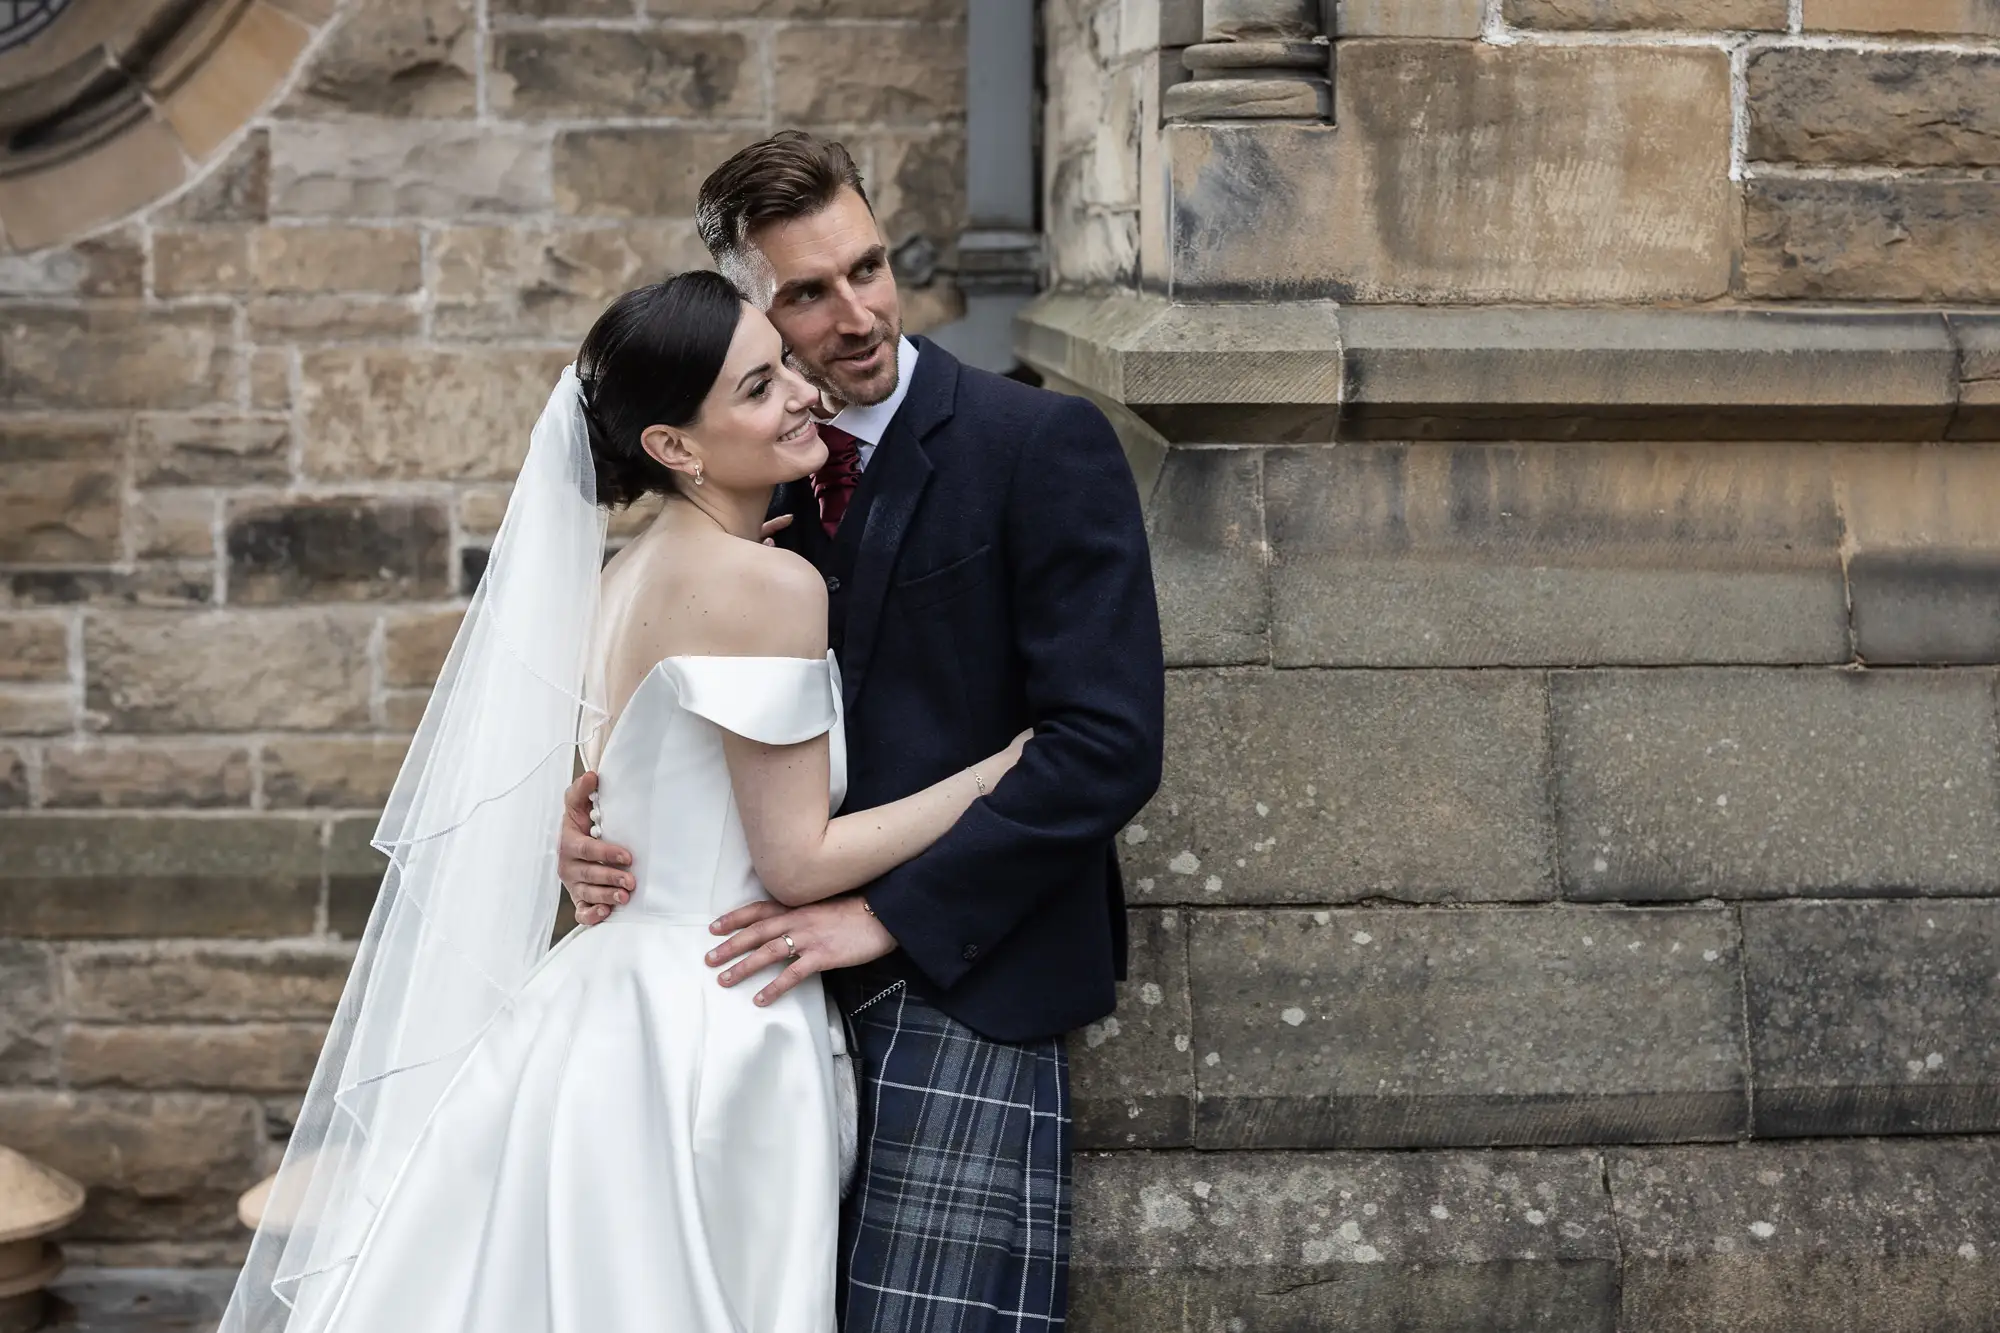 A bride in a white dress and a groom in a tartan kilt embracing against a historic stone building background.